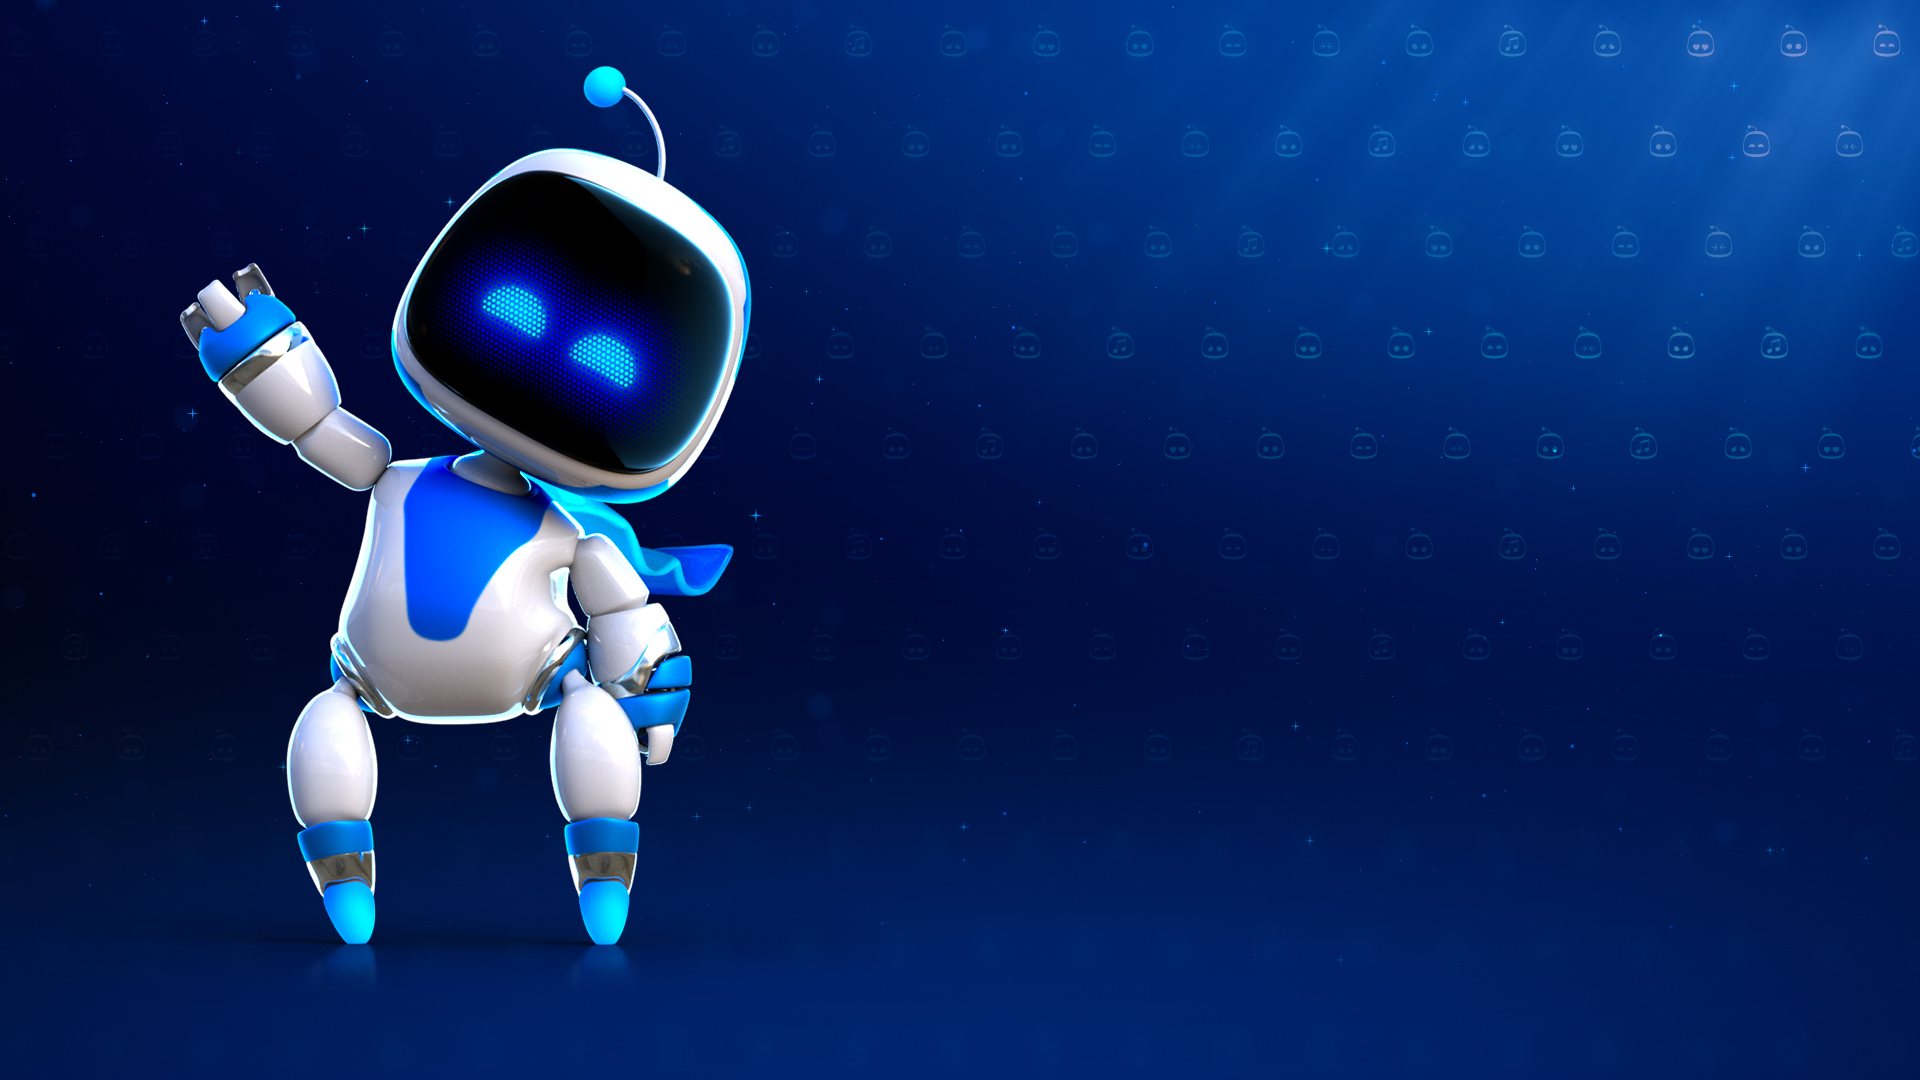 Free download Astro Bot Rescue Mission VR Wallpaper 67754 1920x1080px [1920x1080] for your Desktop, Mobile & Tablet. Explore Rescue Wallpaper. Rescue Wallpaper